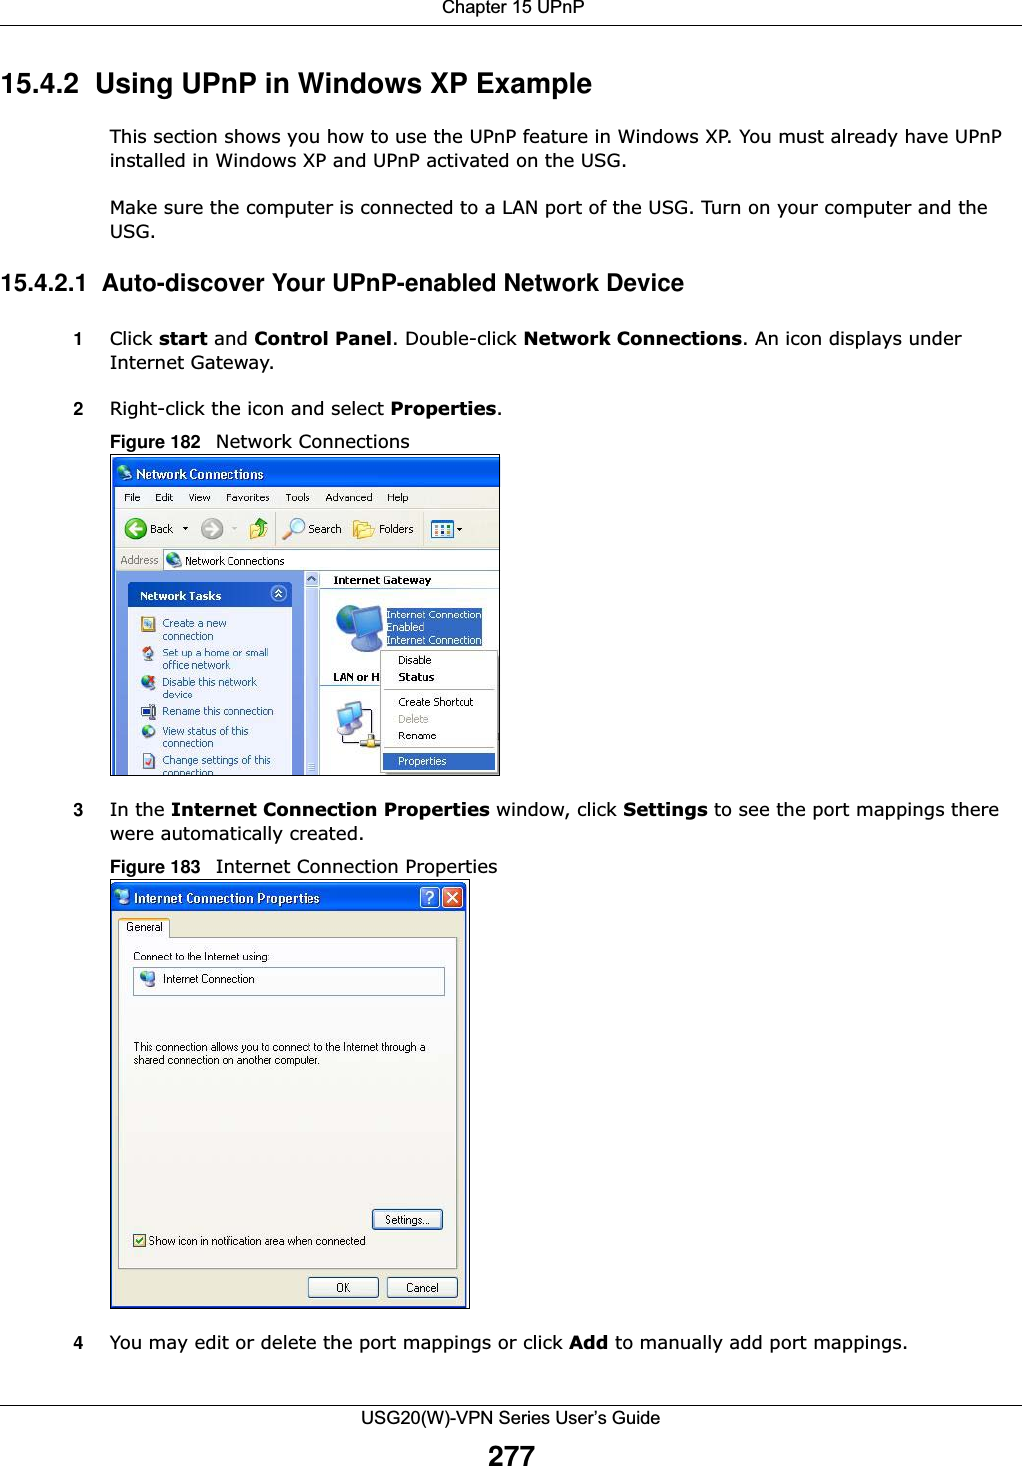  Chapter 15 UPnPUSG20(W)-VPN Series User’s Guide27715.4.2  Using UPnP in Windows XP ExampleThis section shows you how to use the UPnP feature in Windows XP. You must already have UPnP installed in Windows XP and UPnP activated on the USG.Make sure the computer is connected to a LAN port of the USG. Turn on your computer and the USG. 15.4.2.1  Auto-discover Your UPnP-enabled Network Device1Click start and Control Panel. Double-click Network Connections. An icon displays under Internet Gateway.2Right-click the icon and select Properties. Figure 182   Network Connections3In the Internet Connection Properties window, click Settings to see the port mappings there were automatically created. Figure 183   Internet Connection Properties 4You may edit or delete the port mappings or click Add to manually add port mappings. 